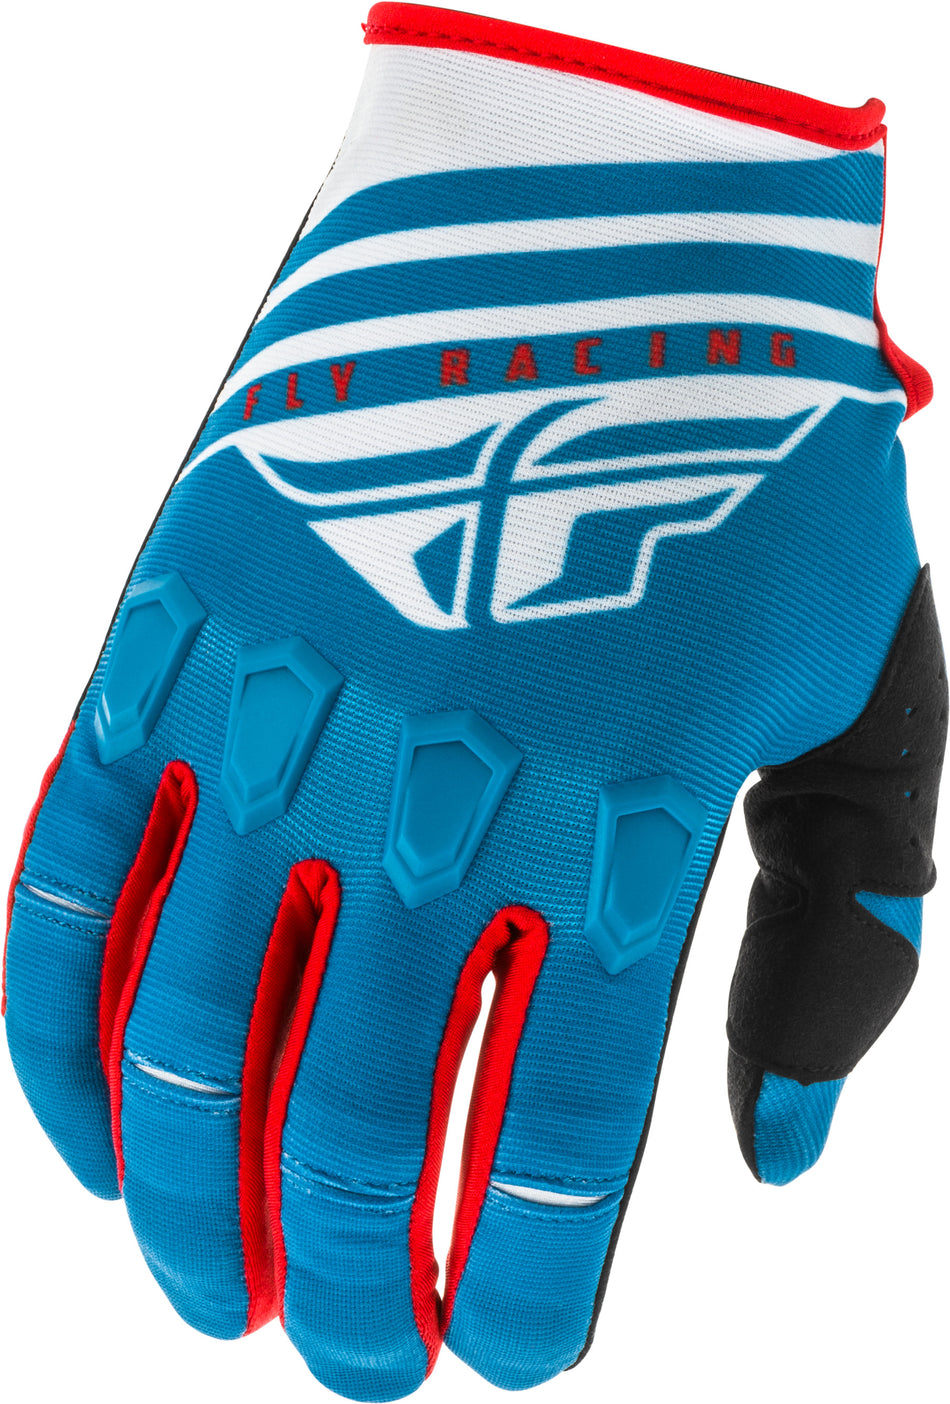 FLY RACING Kinetic K220 Gloves Blue/White/Red Sz 11 373-51111